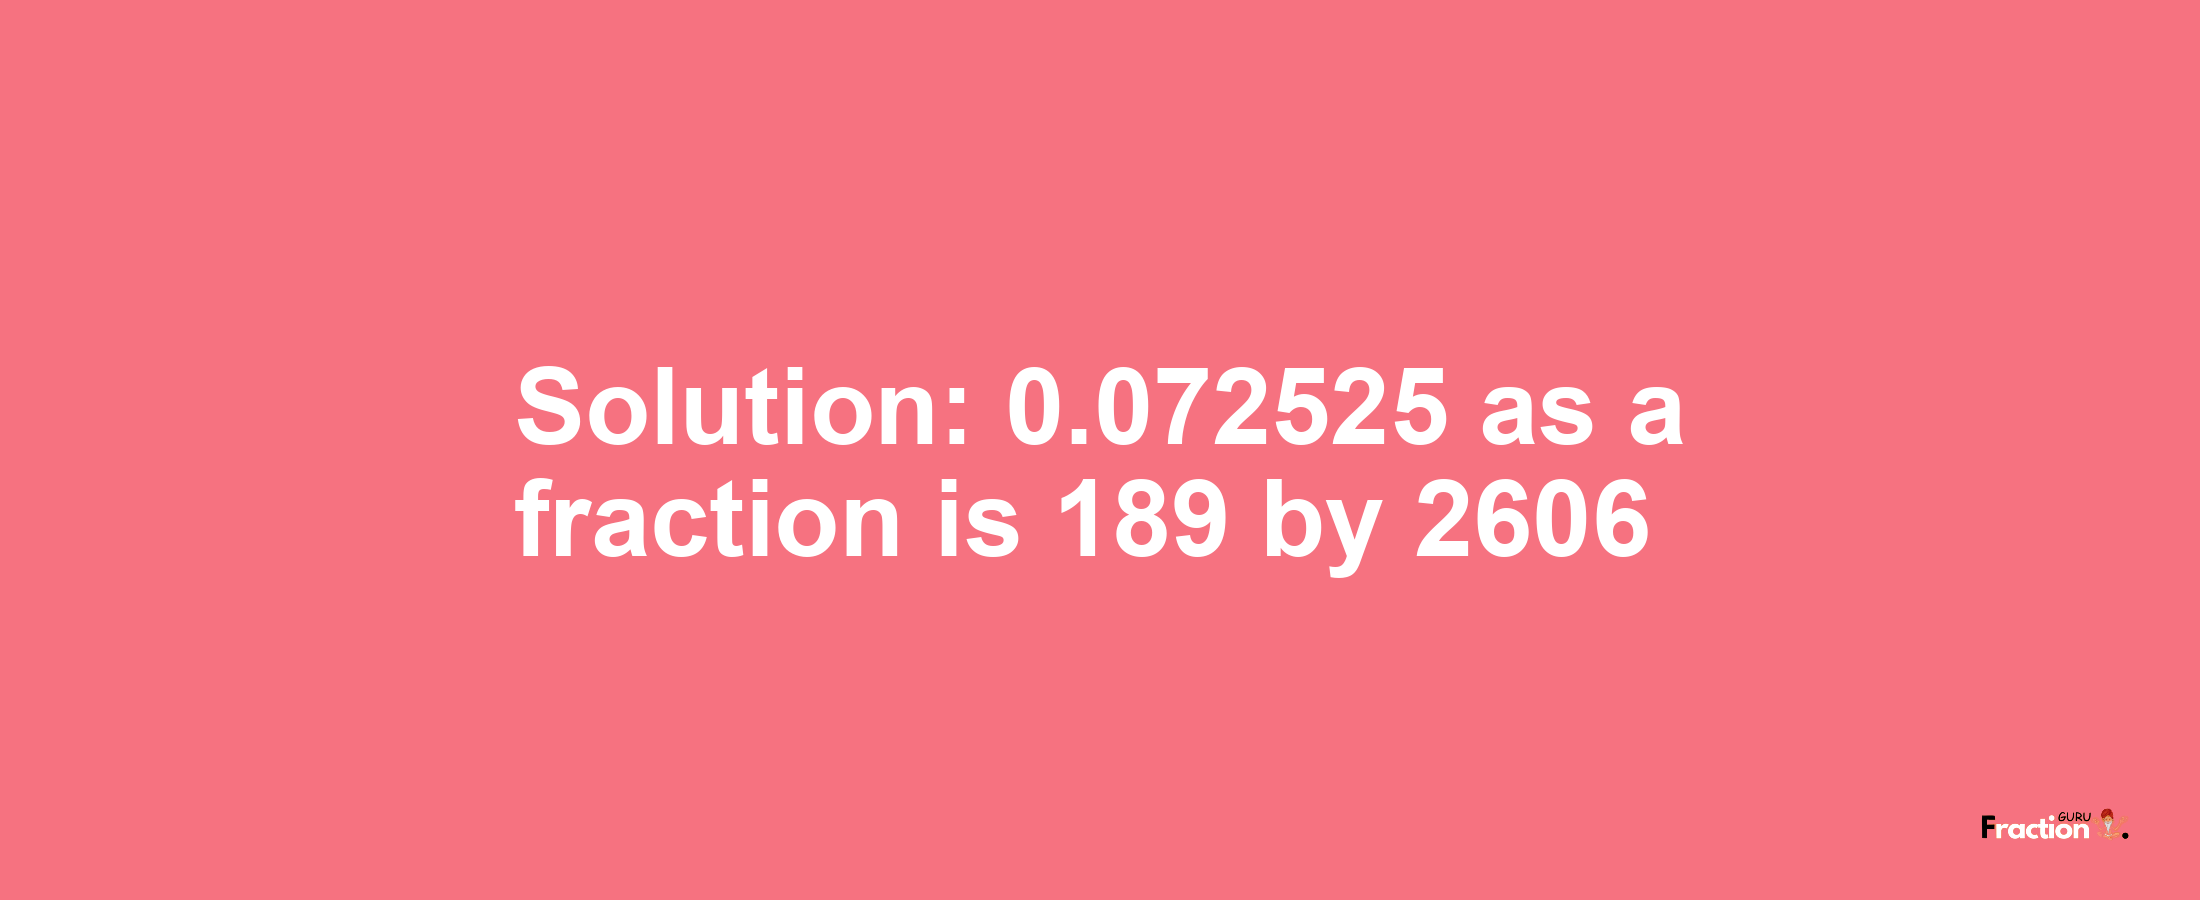 Solution:0.072525 as a fraction is 189/2606